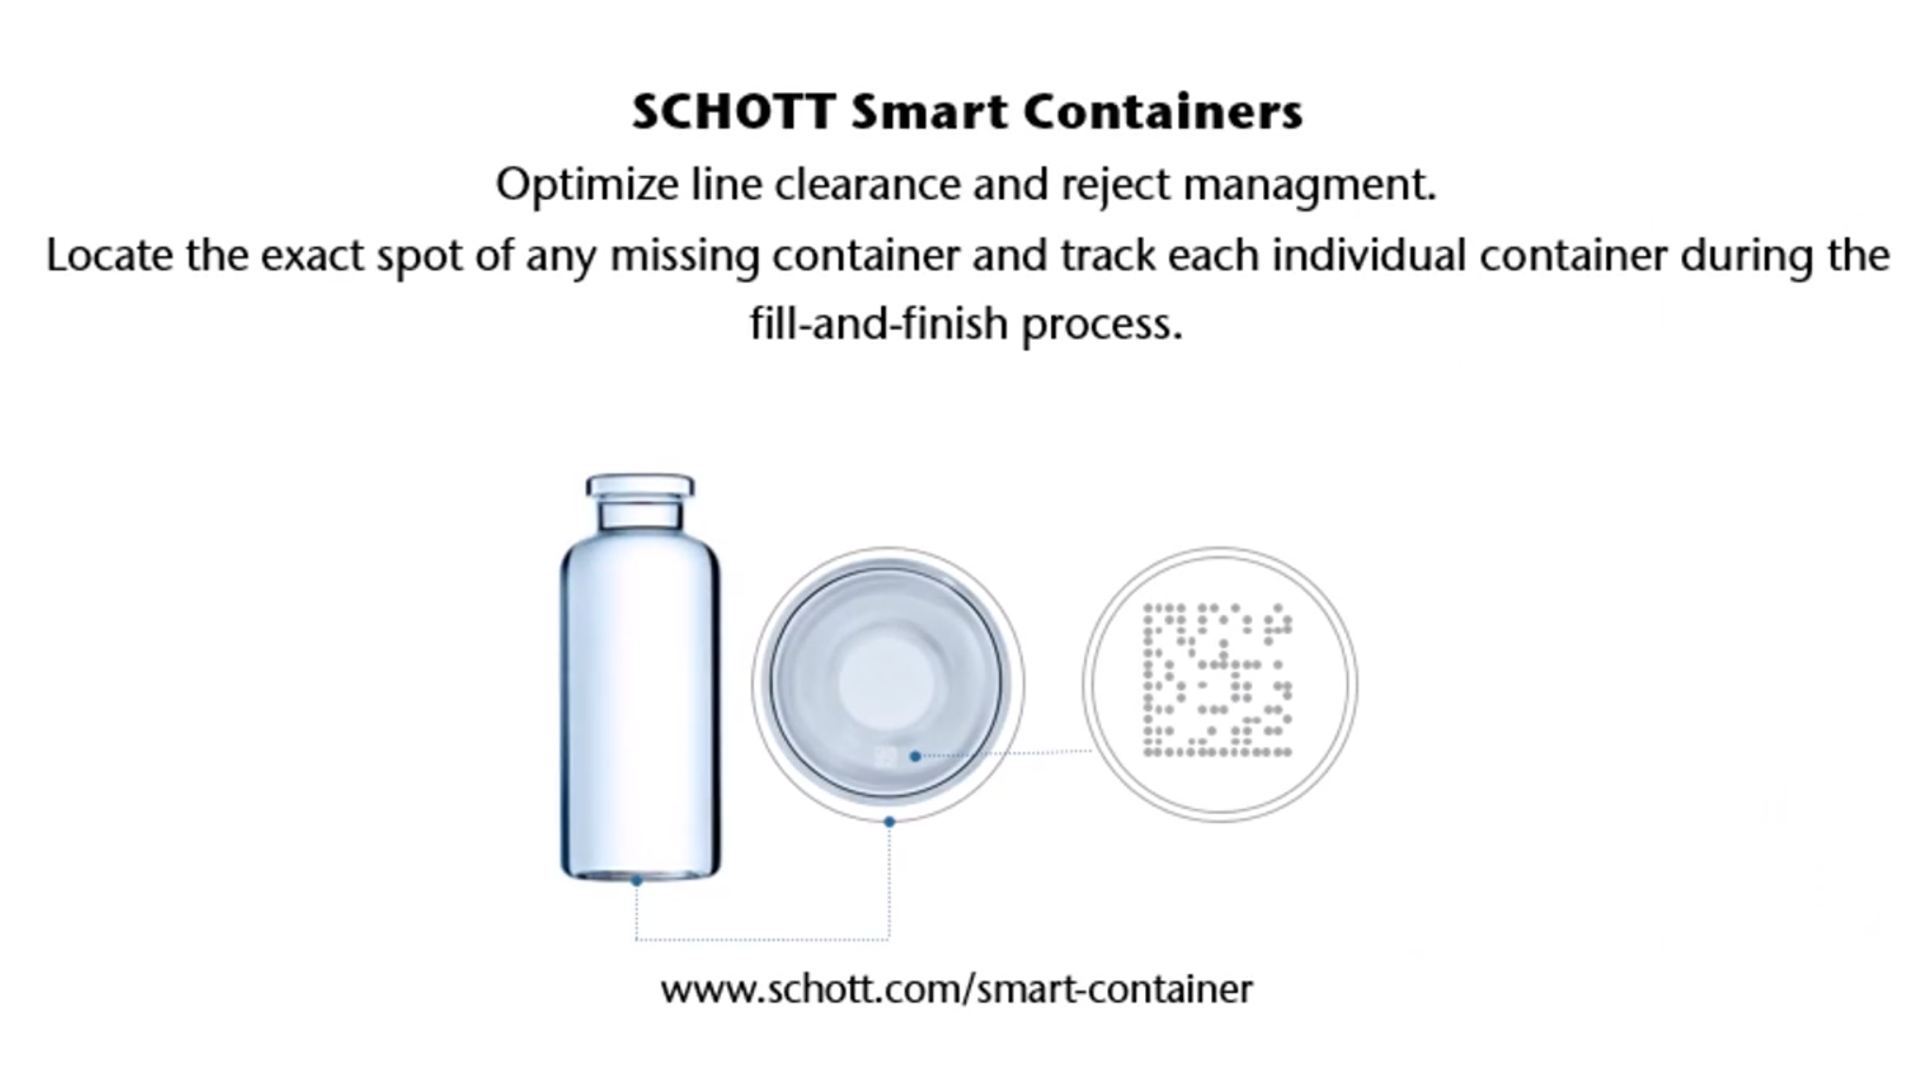 Video showing how SCHOTT Smart Containers improve the line clearance process